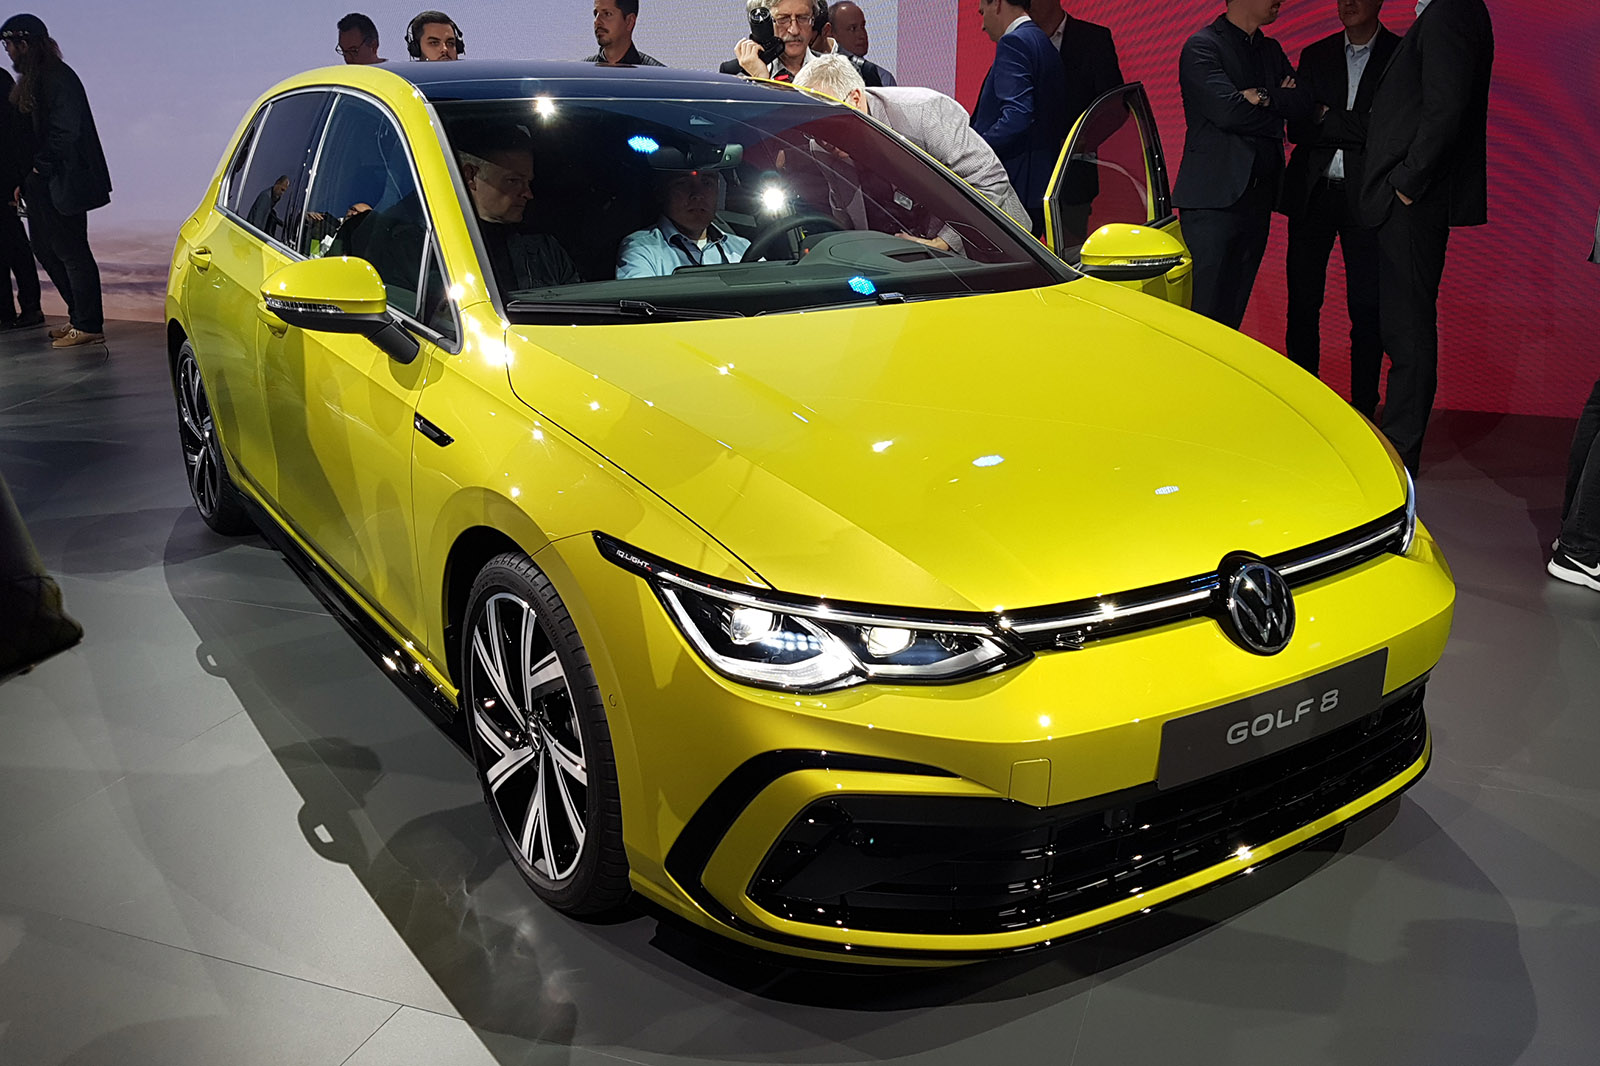 New 2020 Volkswagen Golf: first prices and specs announced ...